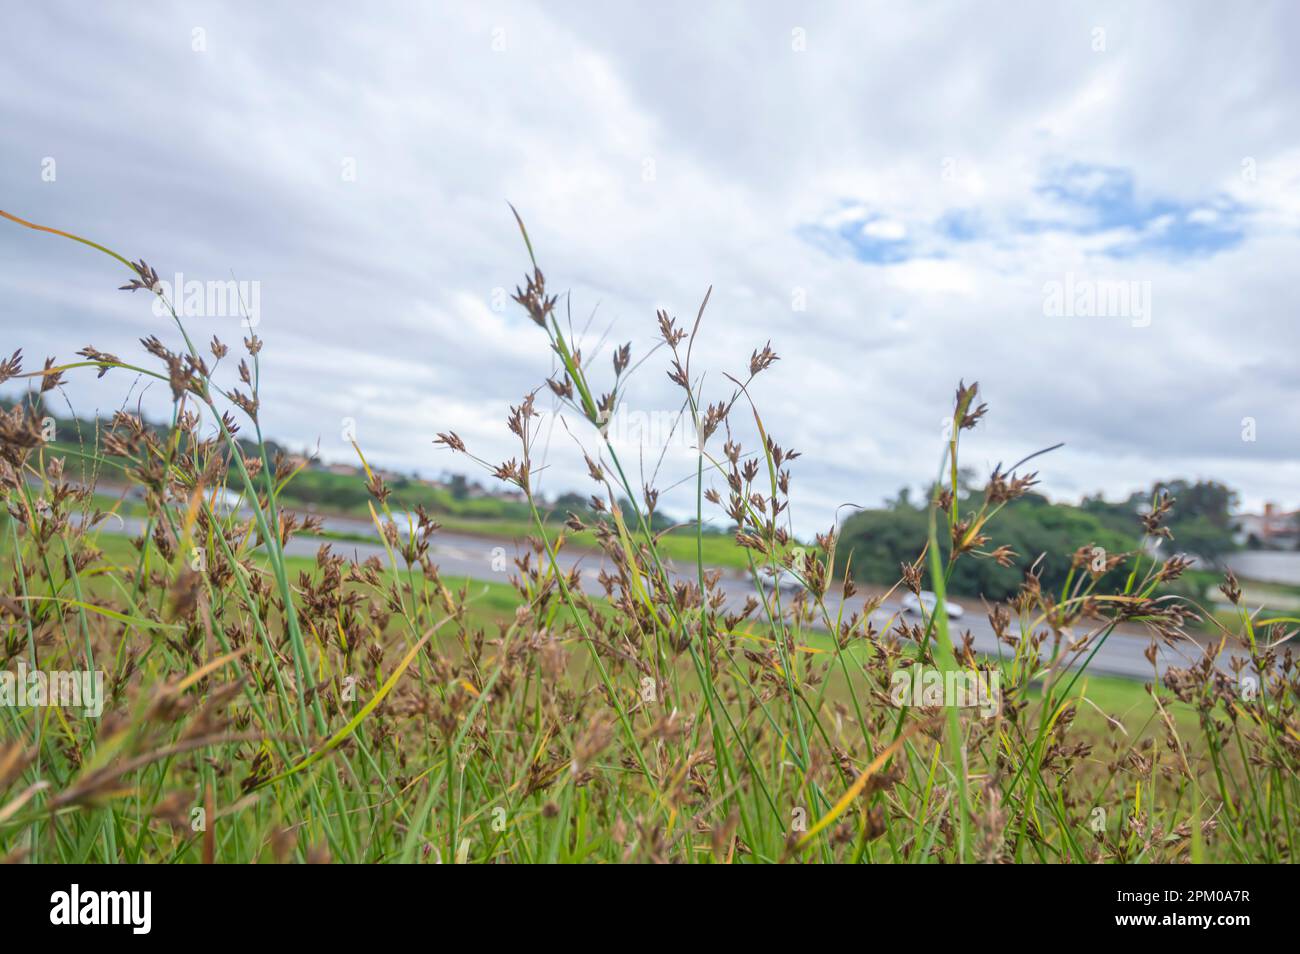 Grass and weeds with blurry cars passing on a highway in the background. Stock Photo